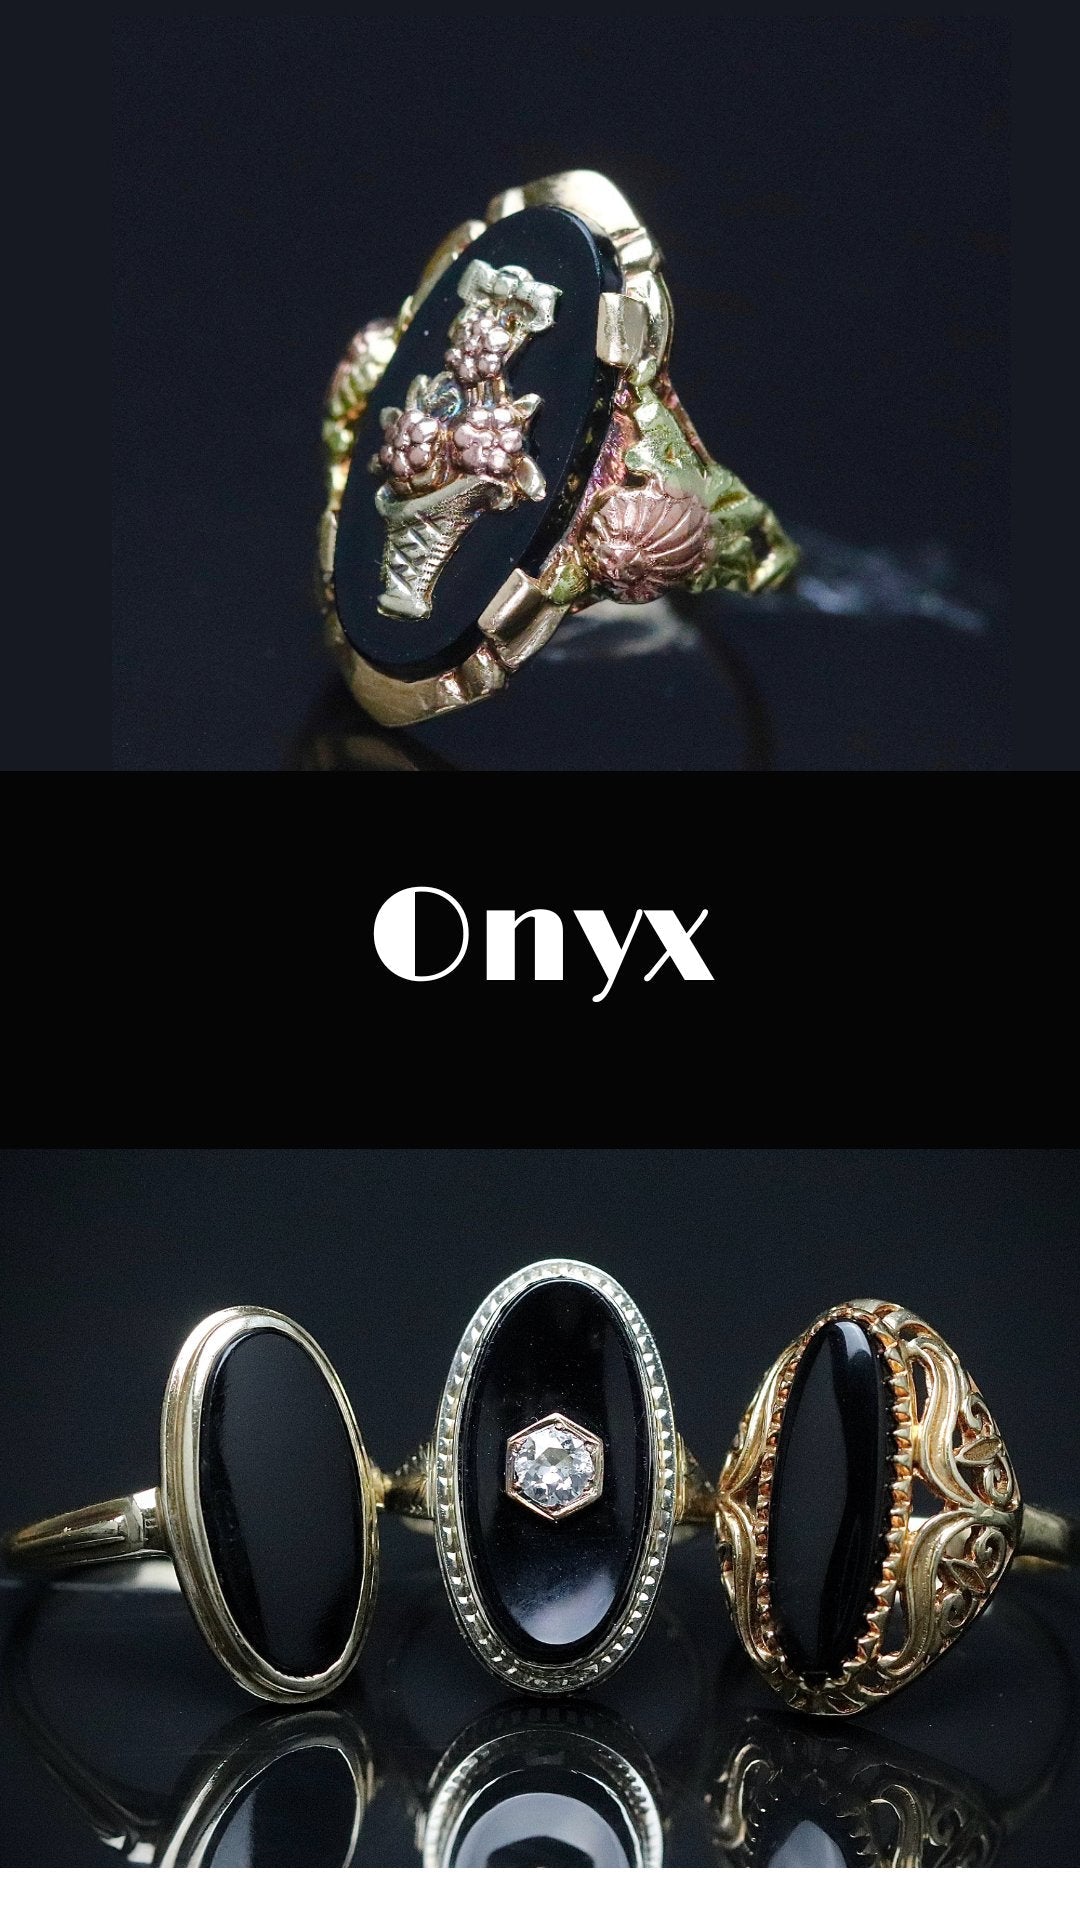 Vintage onyx rings in gold and platinum